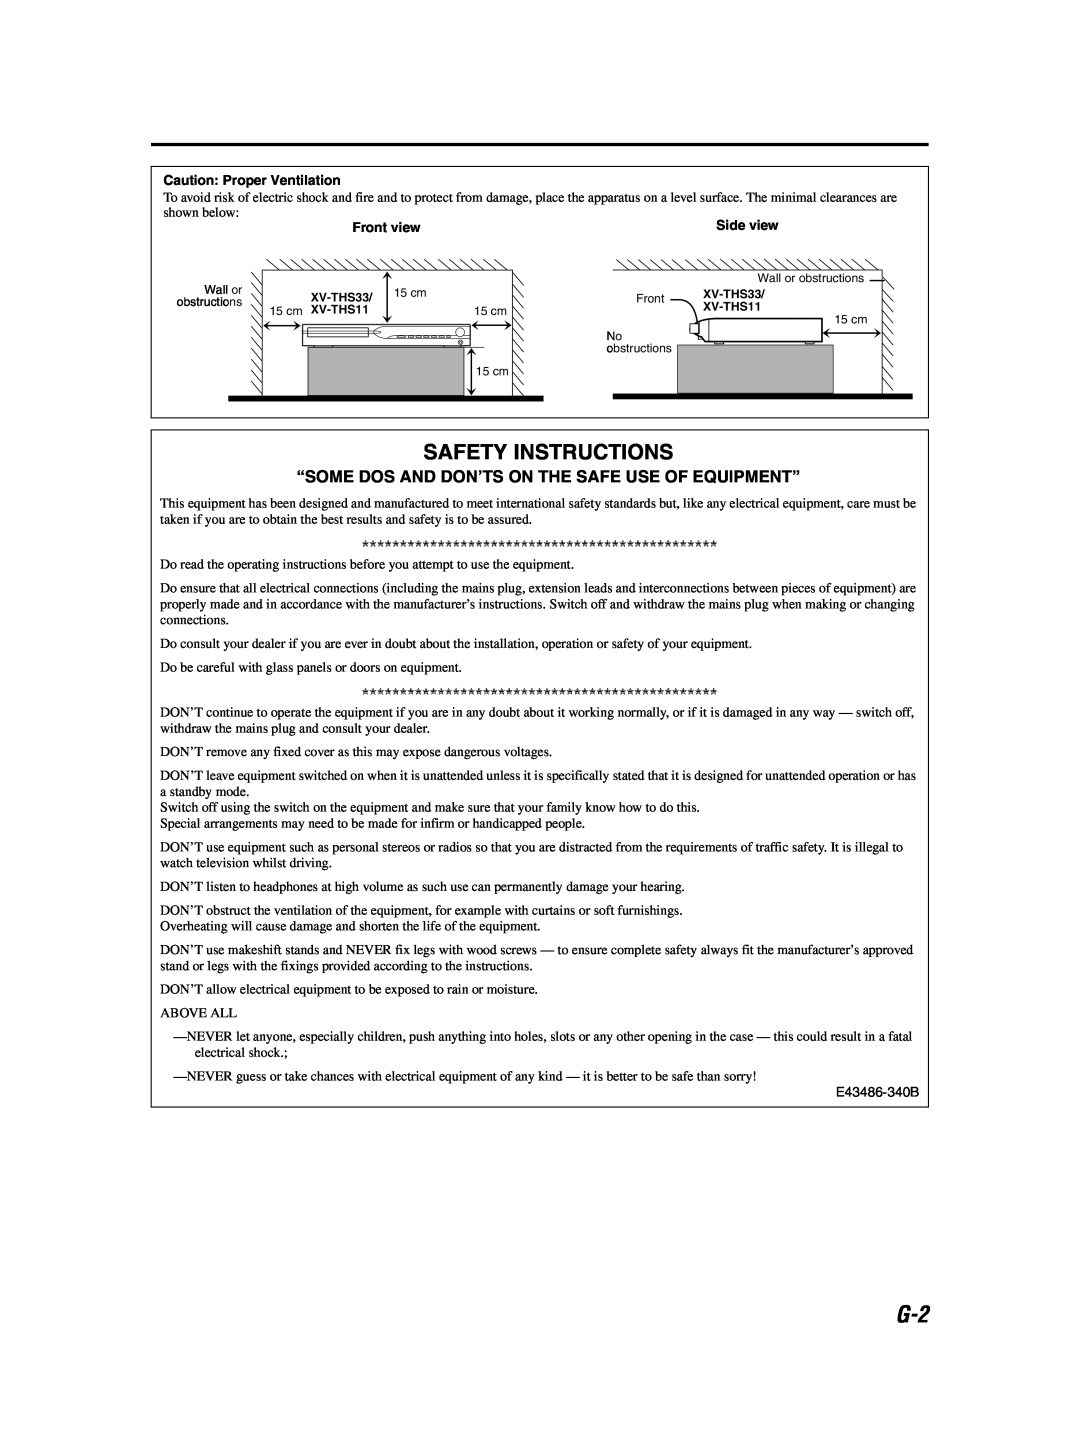 JVC GVT0155-001A manual Safety Instructions, Caution Proper Ventilation, Front view, Side view 